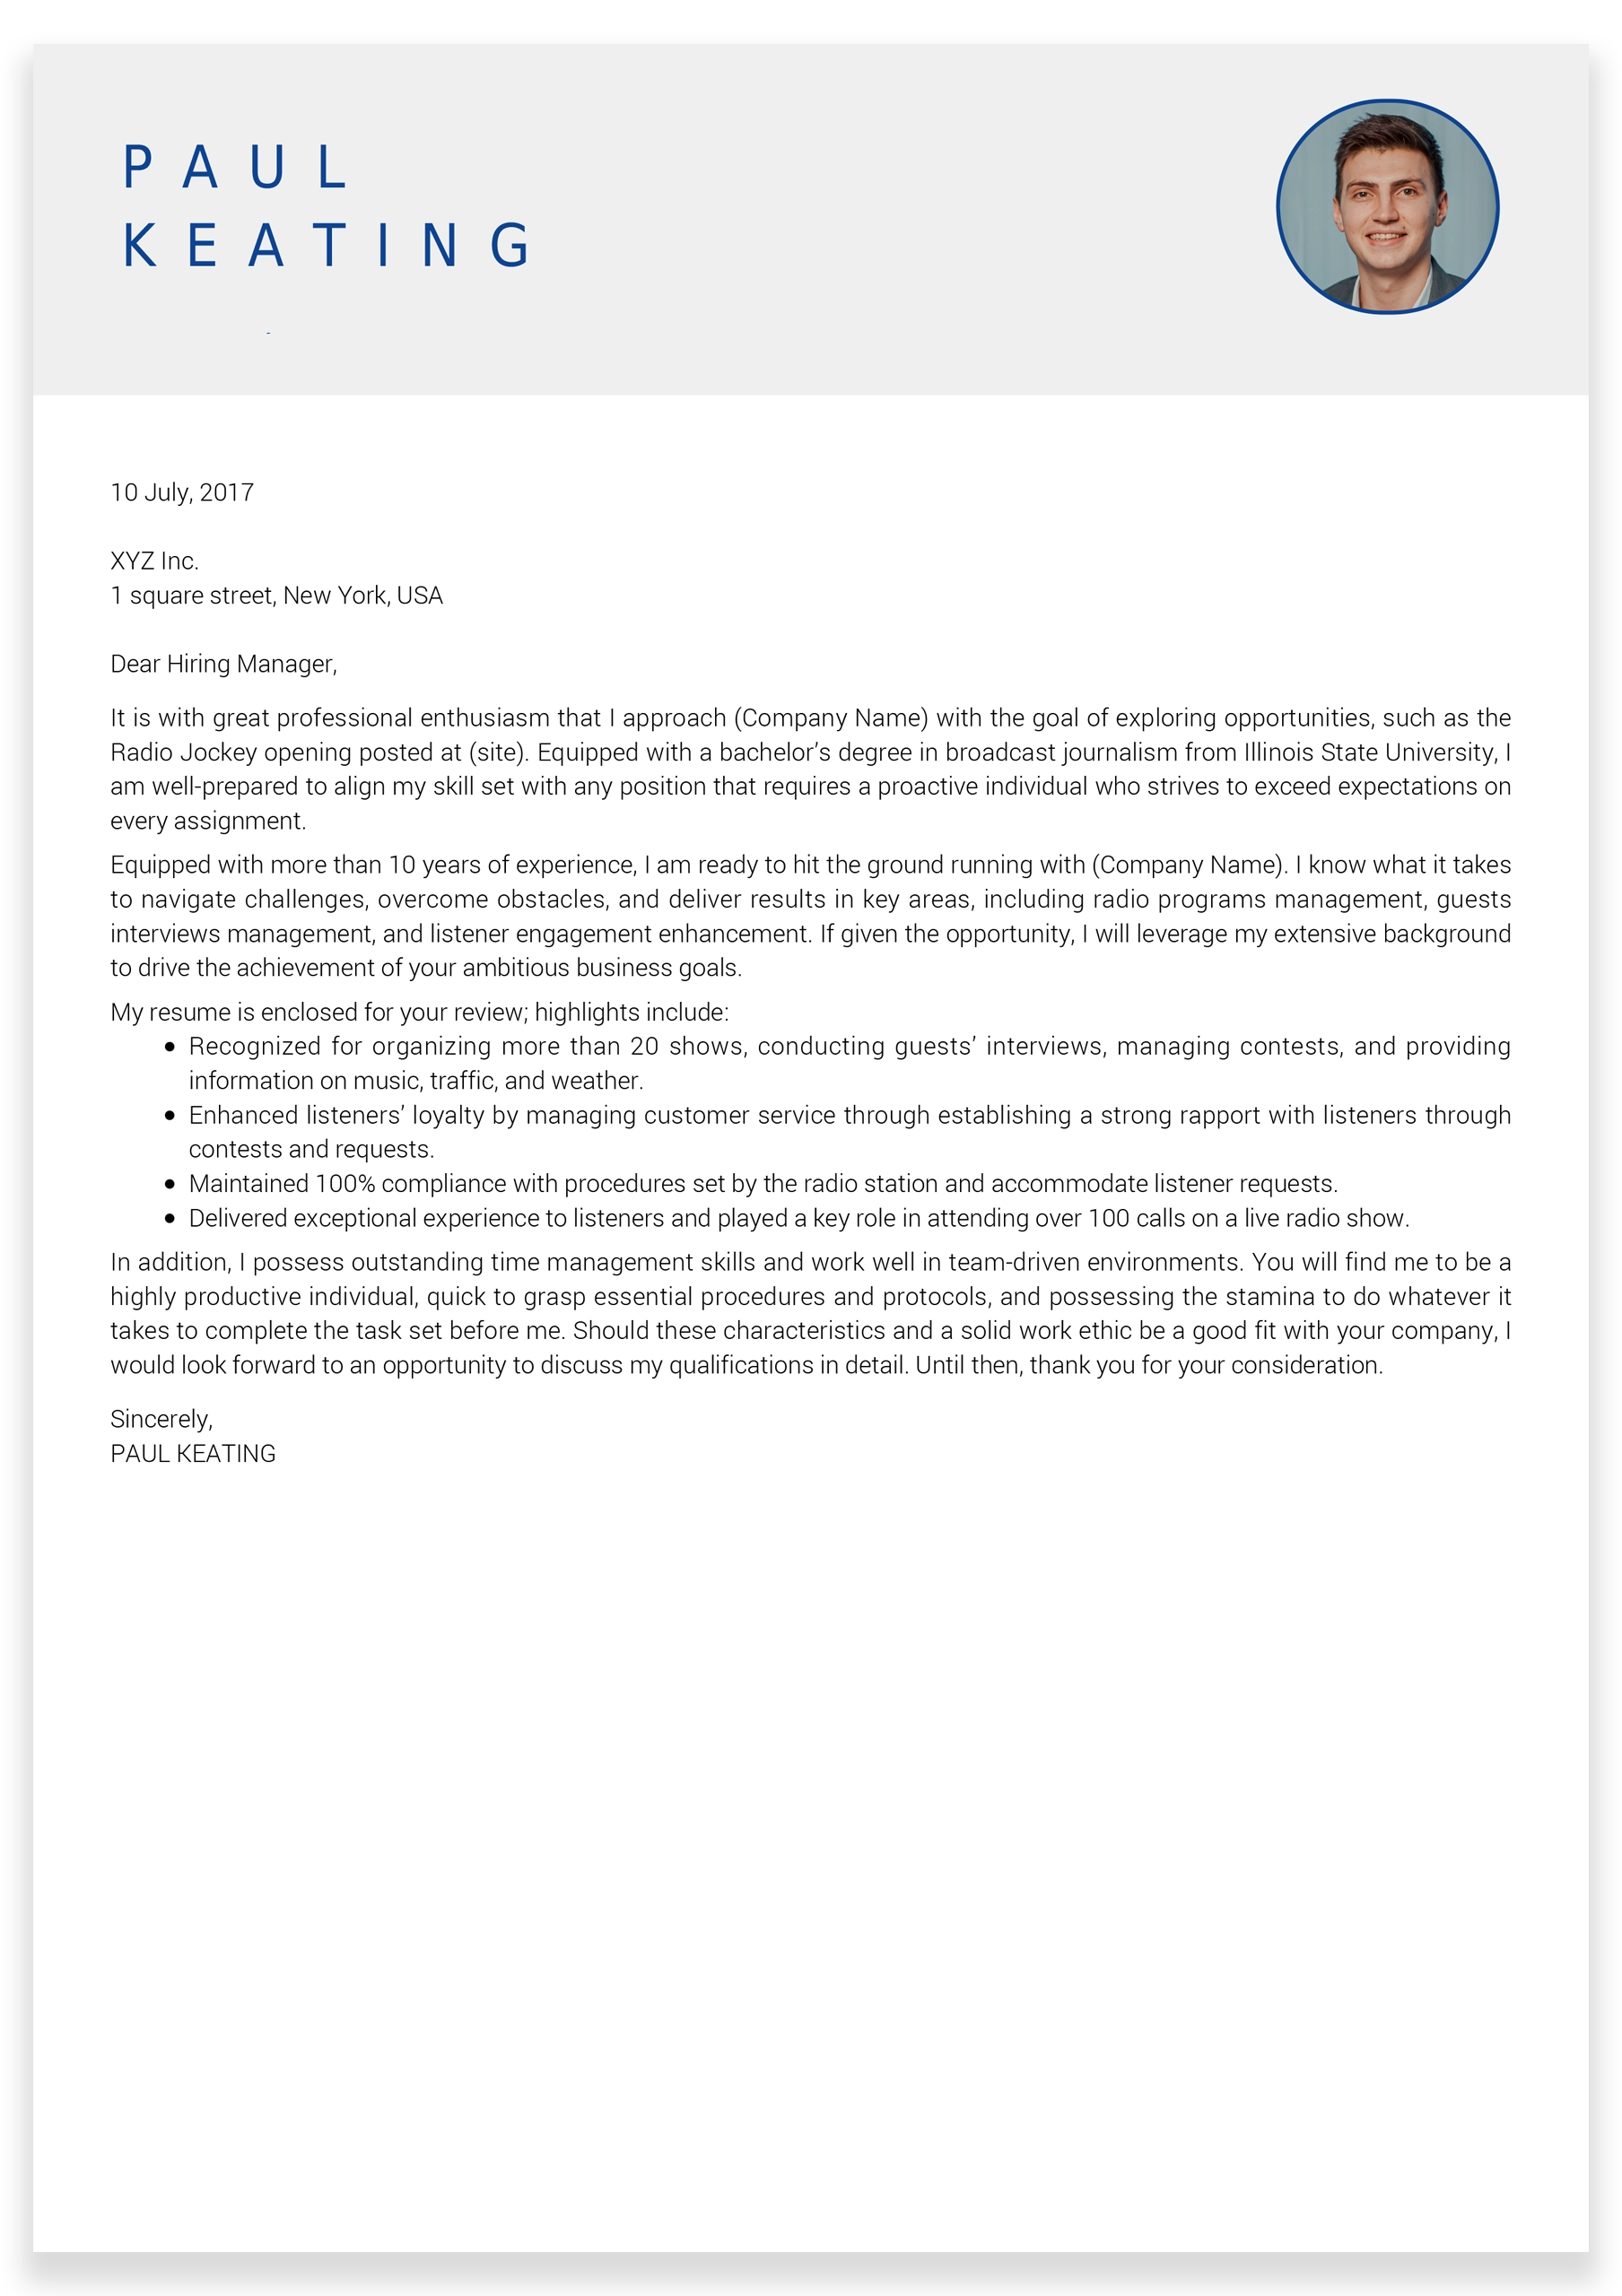 Piping-Stress-Engineer-Cover-Letter-sample9